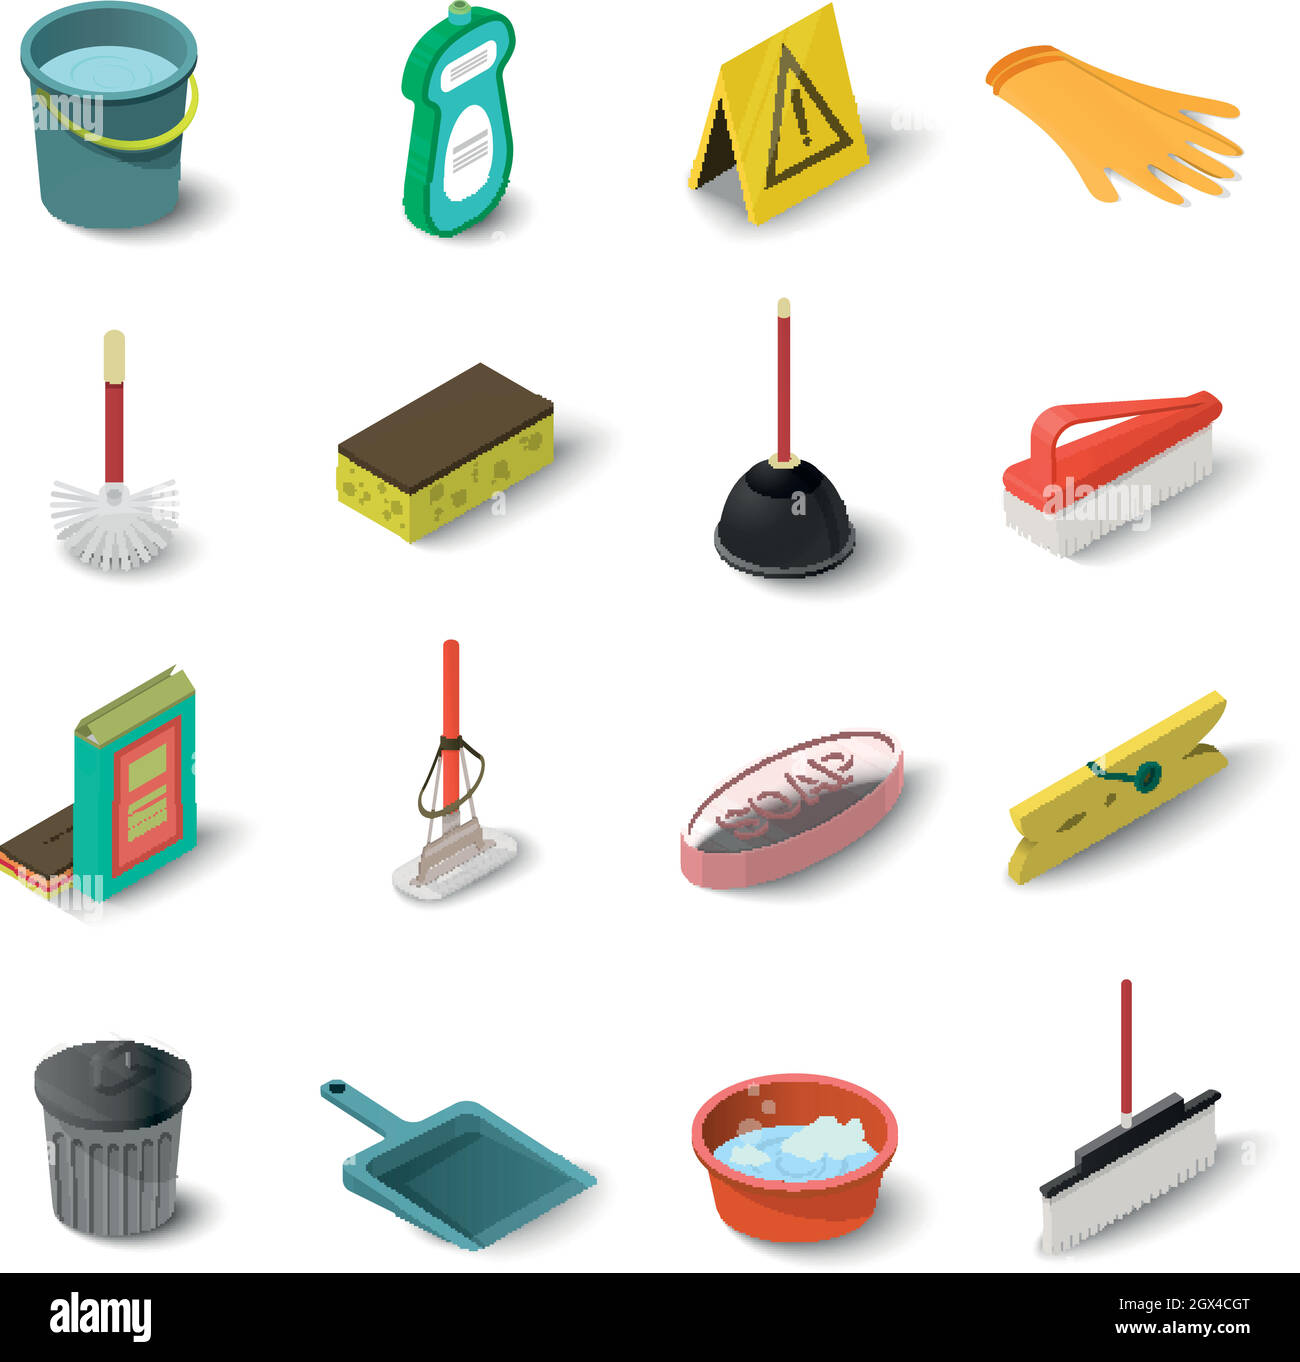 Householding cleaning tools. Housekeeping tool icons for home and offi By  SmartStartStocker